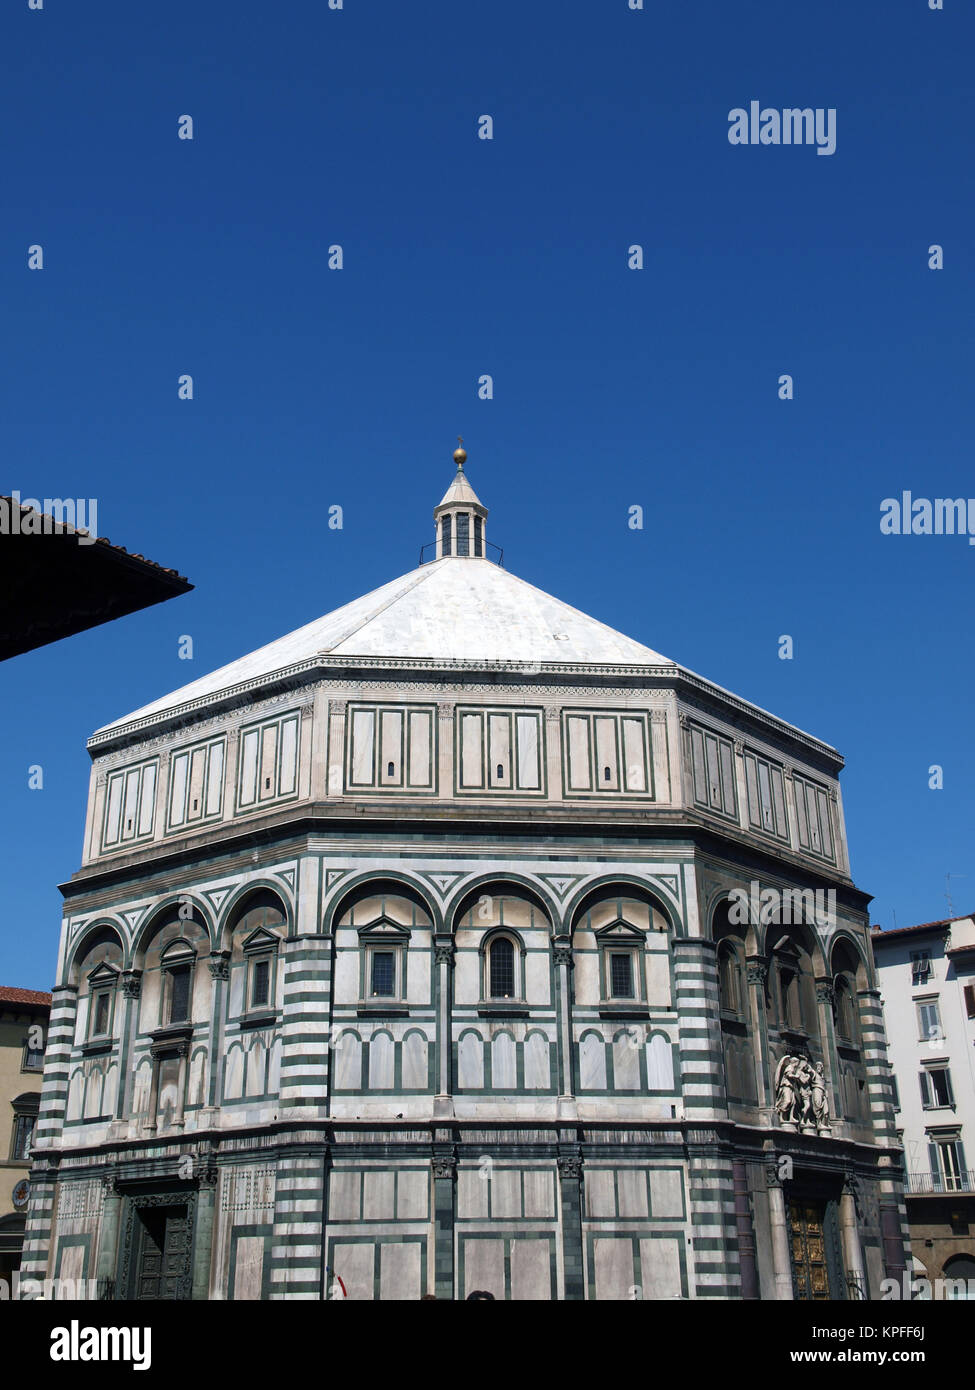 The Baptistery of San Giovanni in Florence Italy. The florence octagonal baptistery of st john is one of the city's oldest buildings built in romanesq Stock Photo